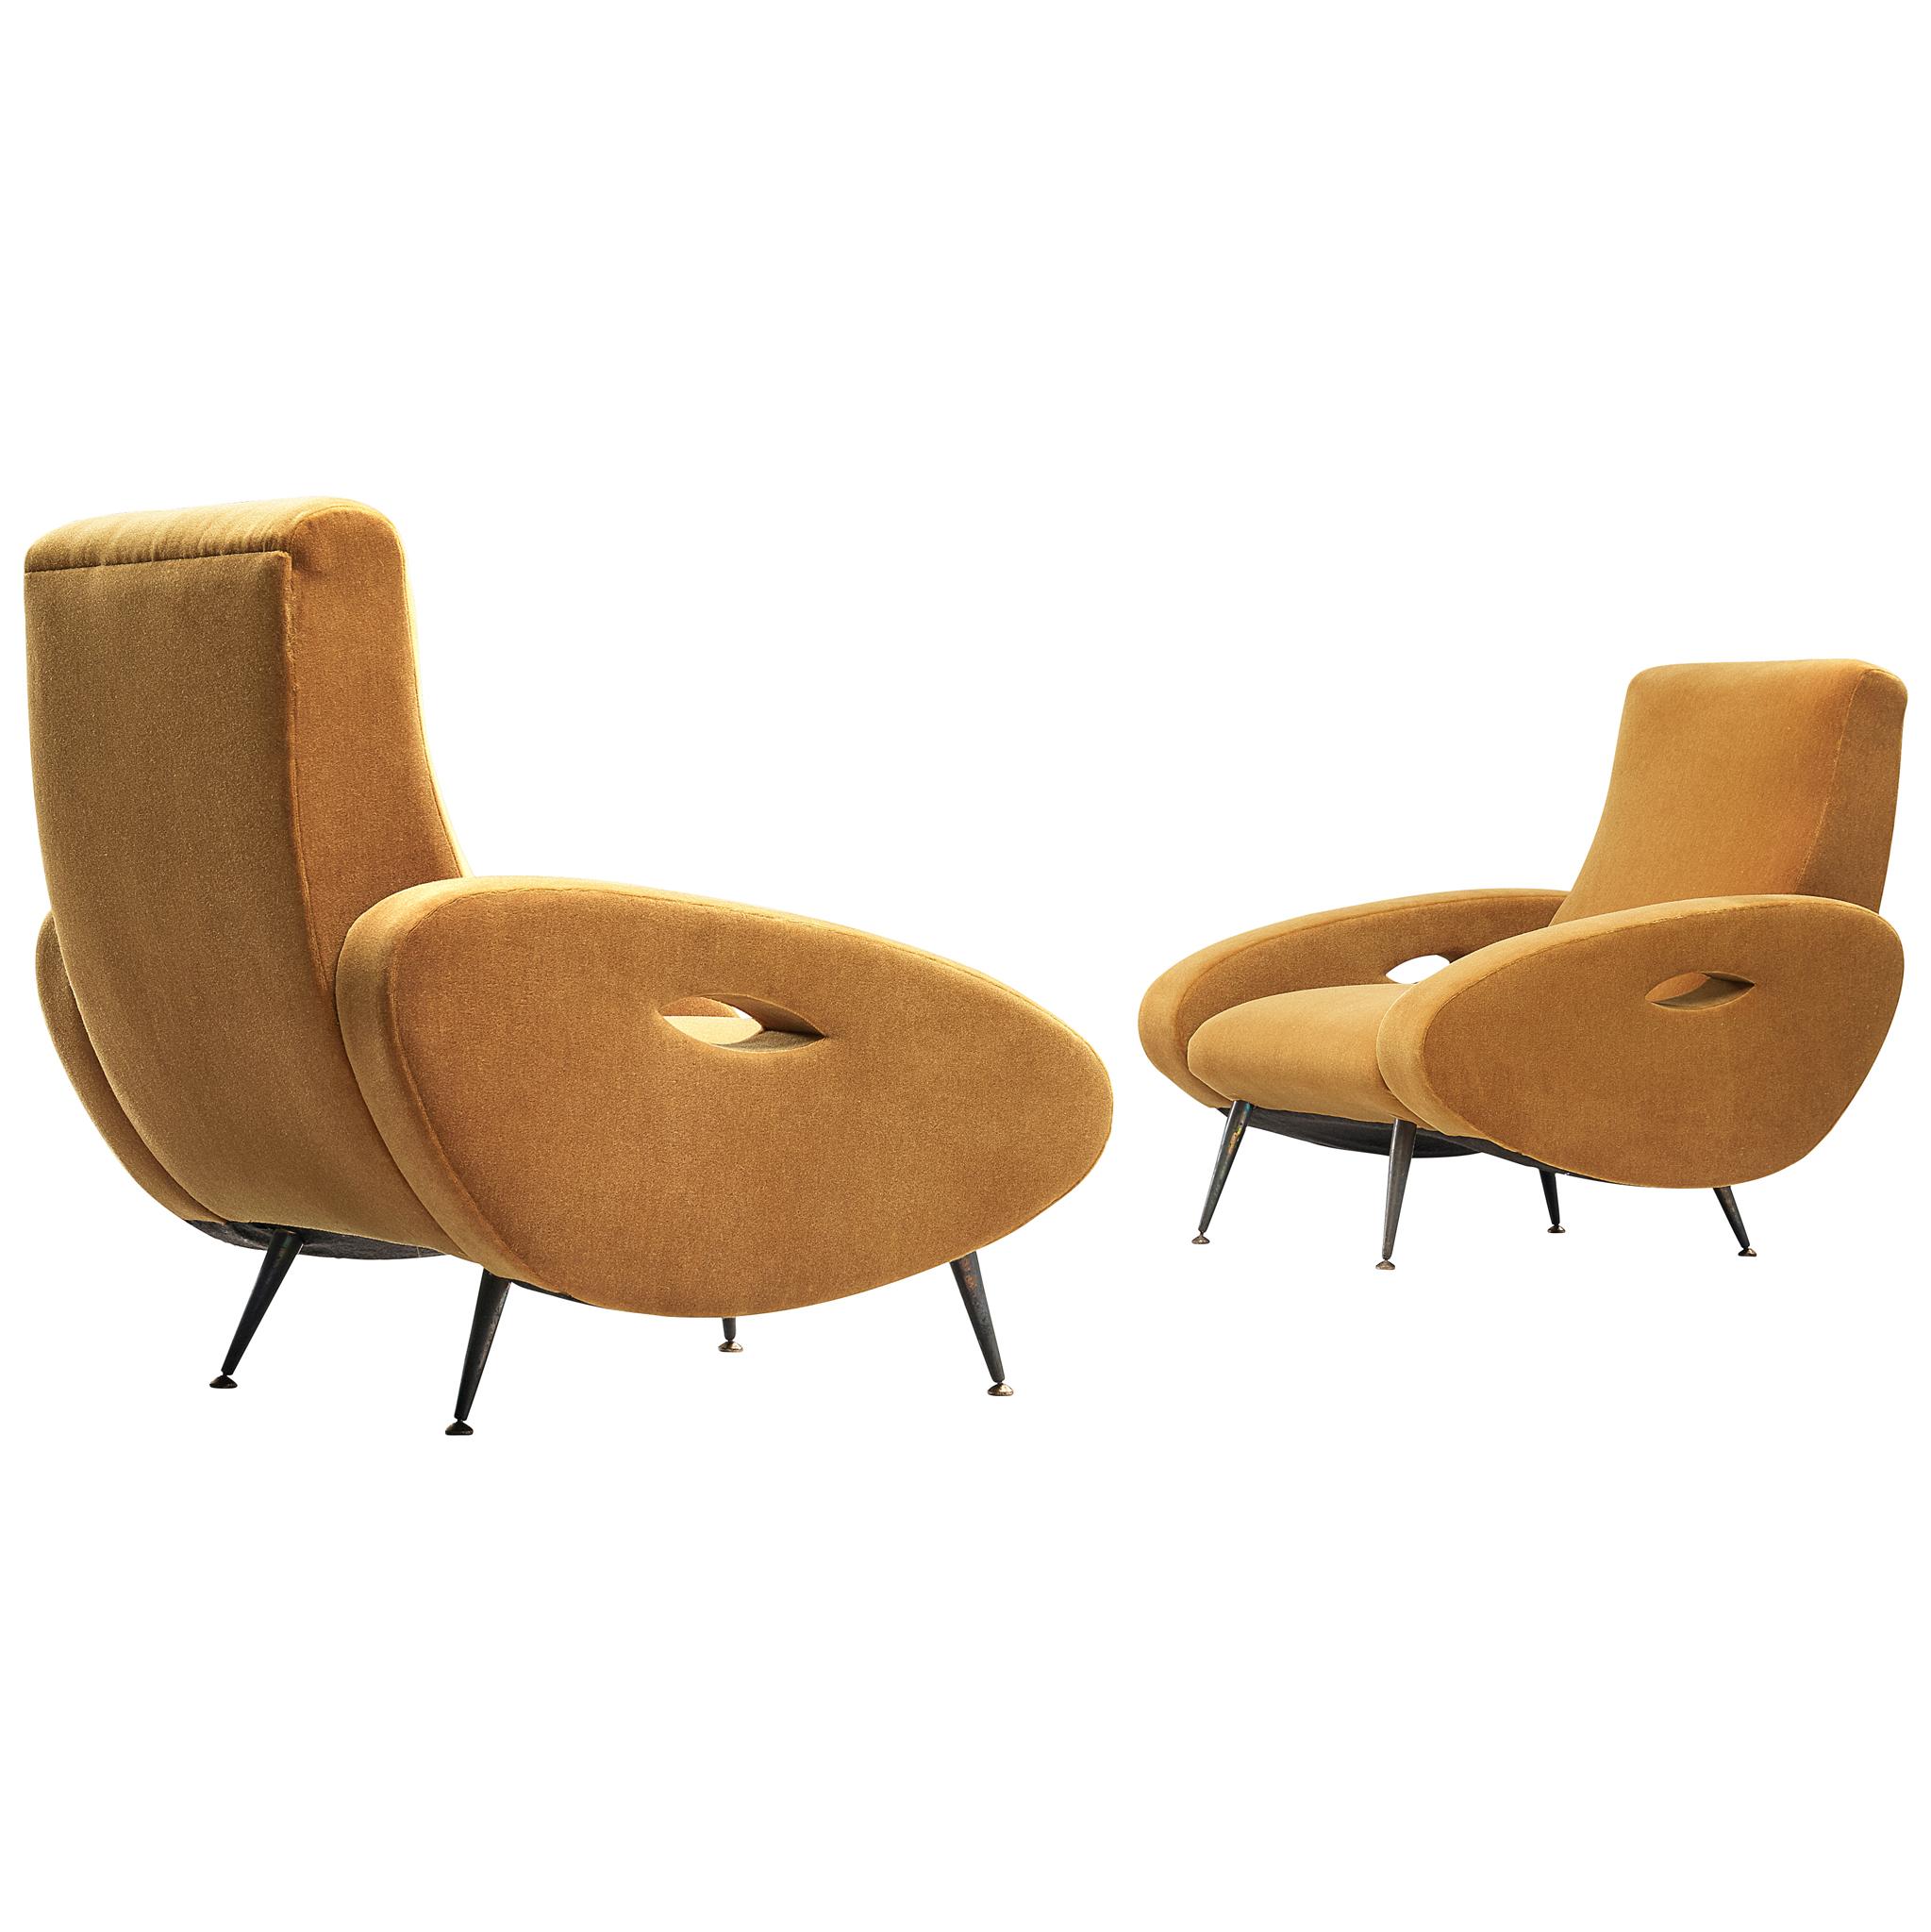 Francois Letourneur for Maurice Mourra, pair of lounge chairs, fabric and brass, France, 1950s

Set of two lounge chairs which show a variety of well designed bold lines which provide each chair with an elegant look that reminds of the American